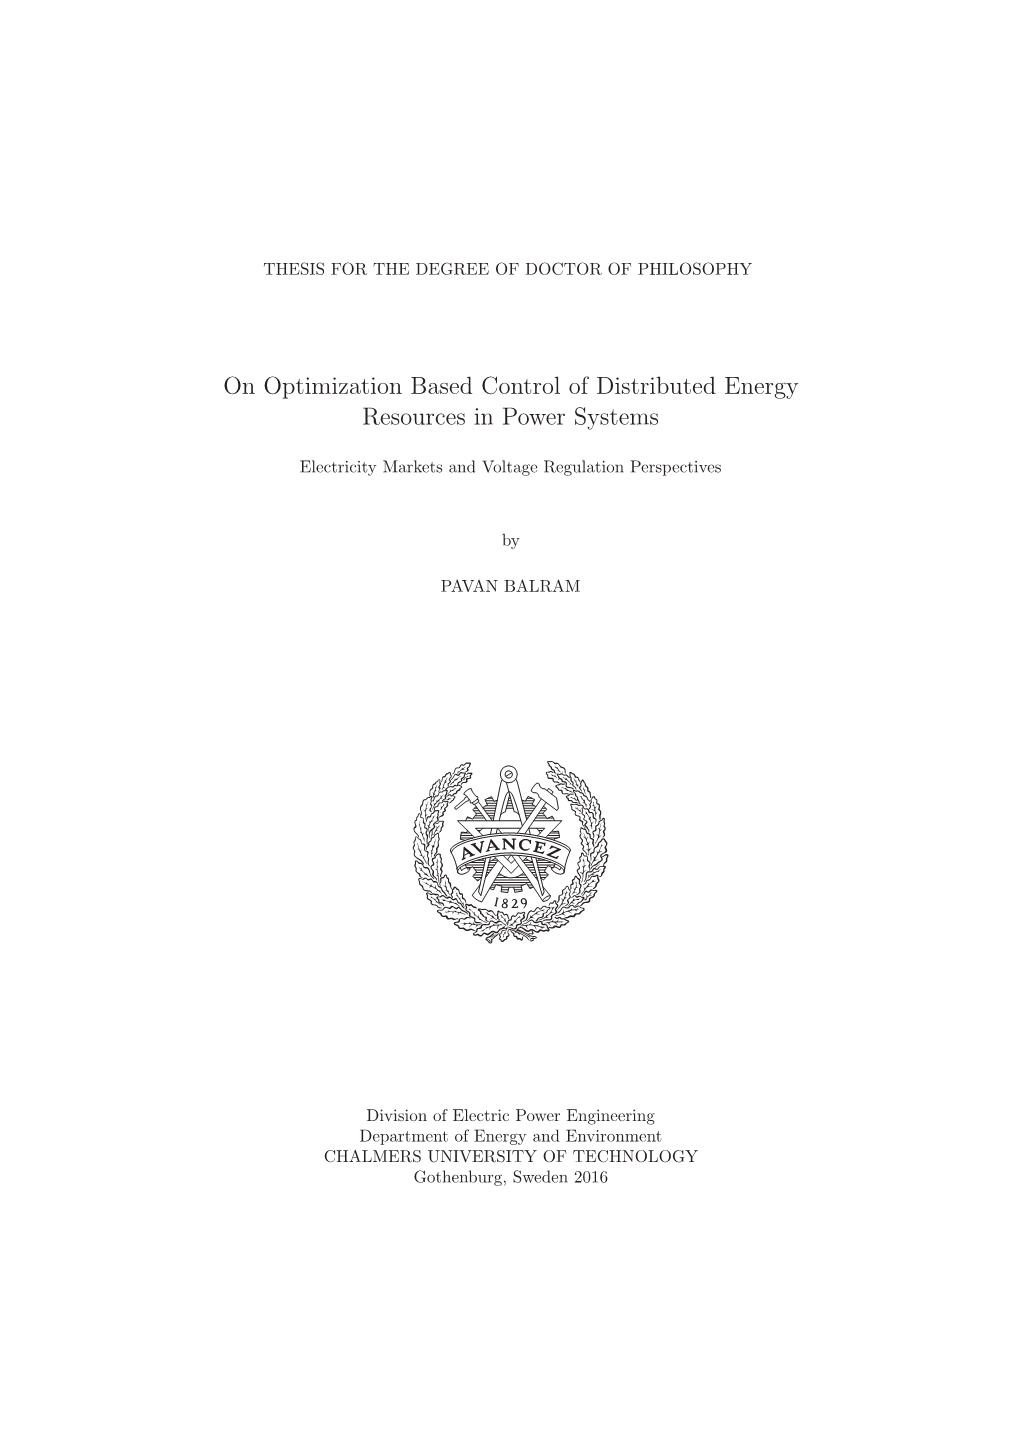 On Optimization Based Control of Distributed Energy Resources in Power Systems